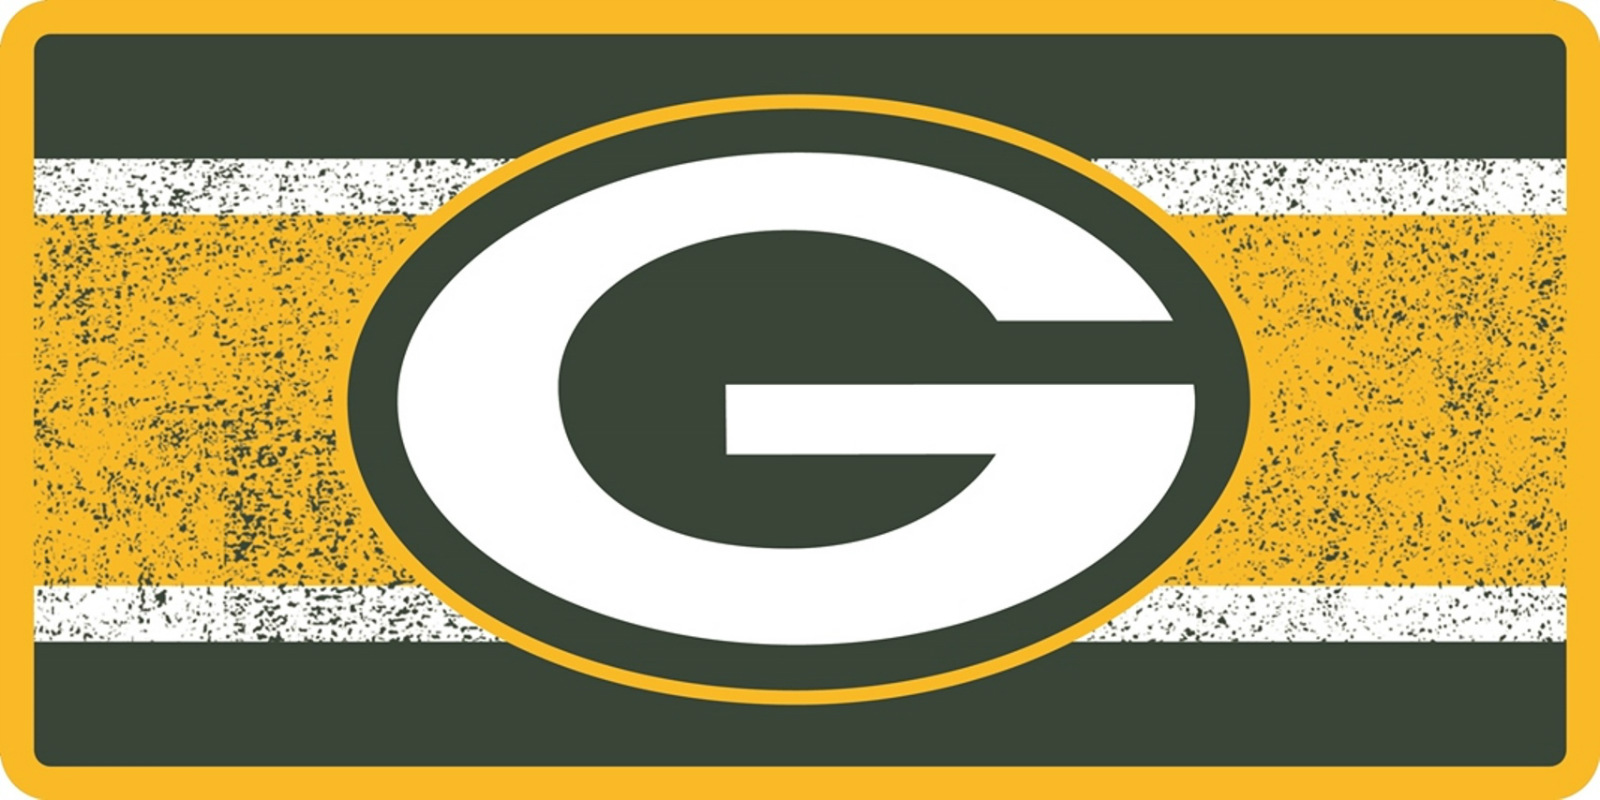 green bay packers vintage